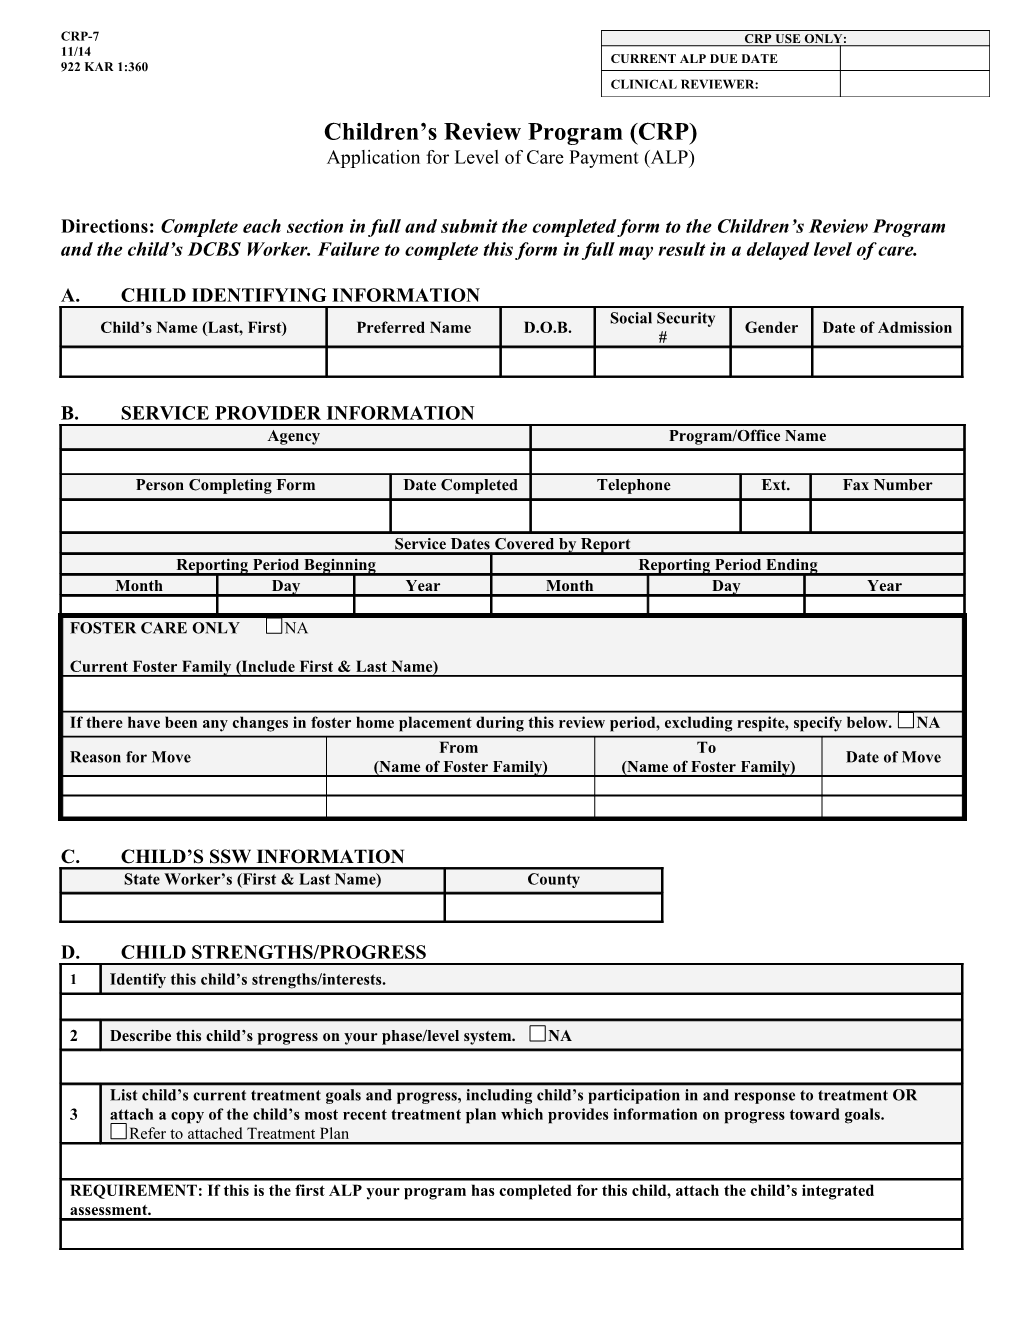 Application for Level of Care Payment